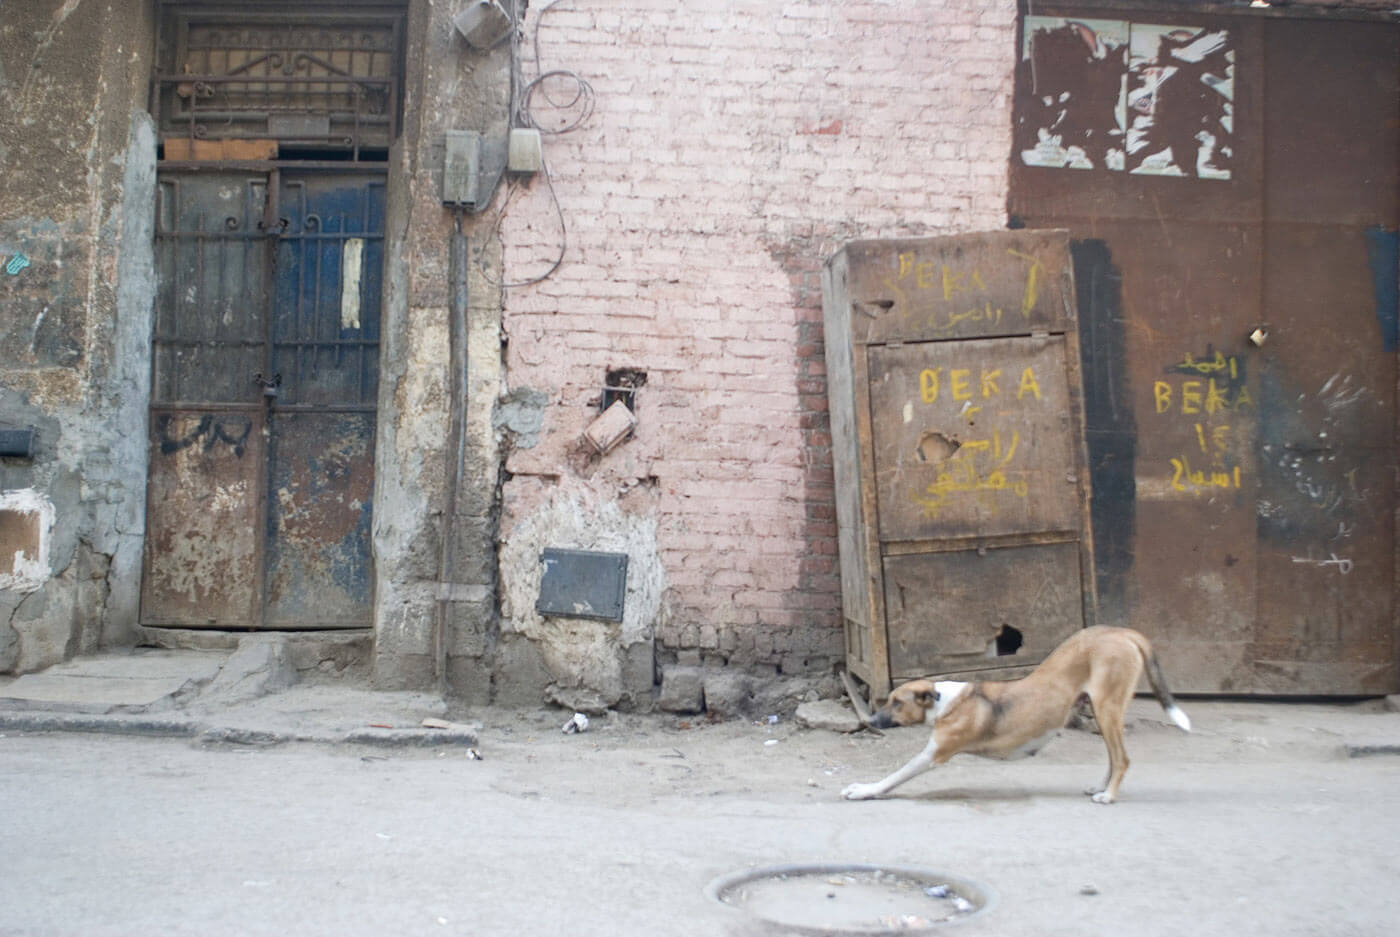 Stretching Dog with Stubborn Box - Cairo, Egypt - Walls and Spaces